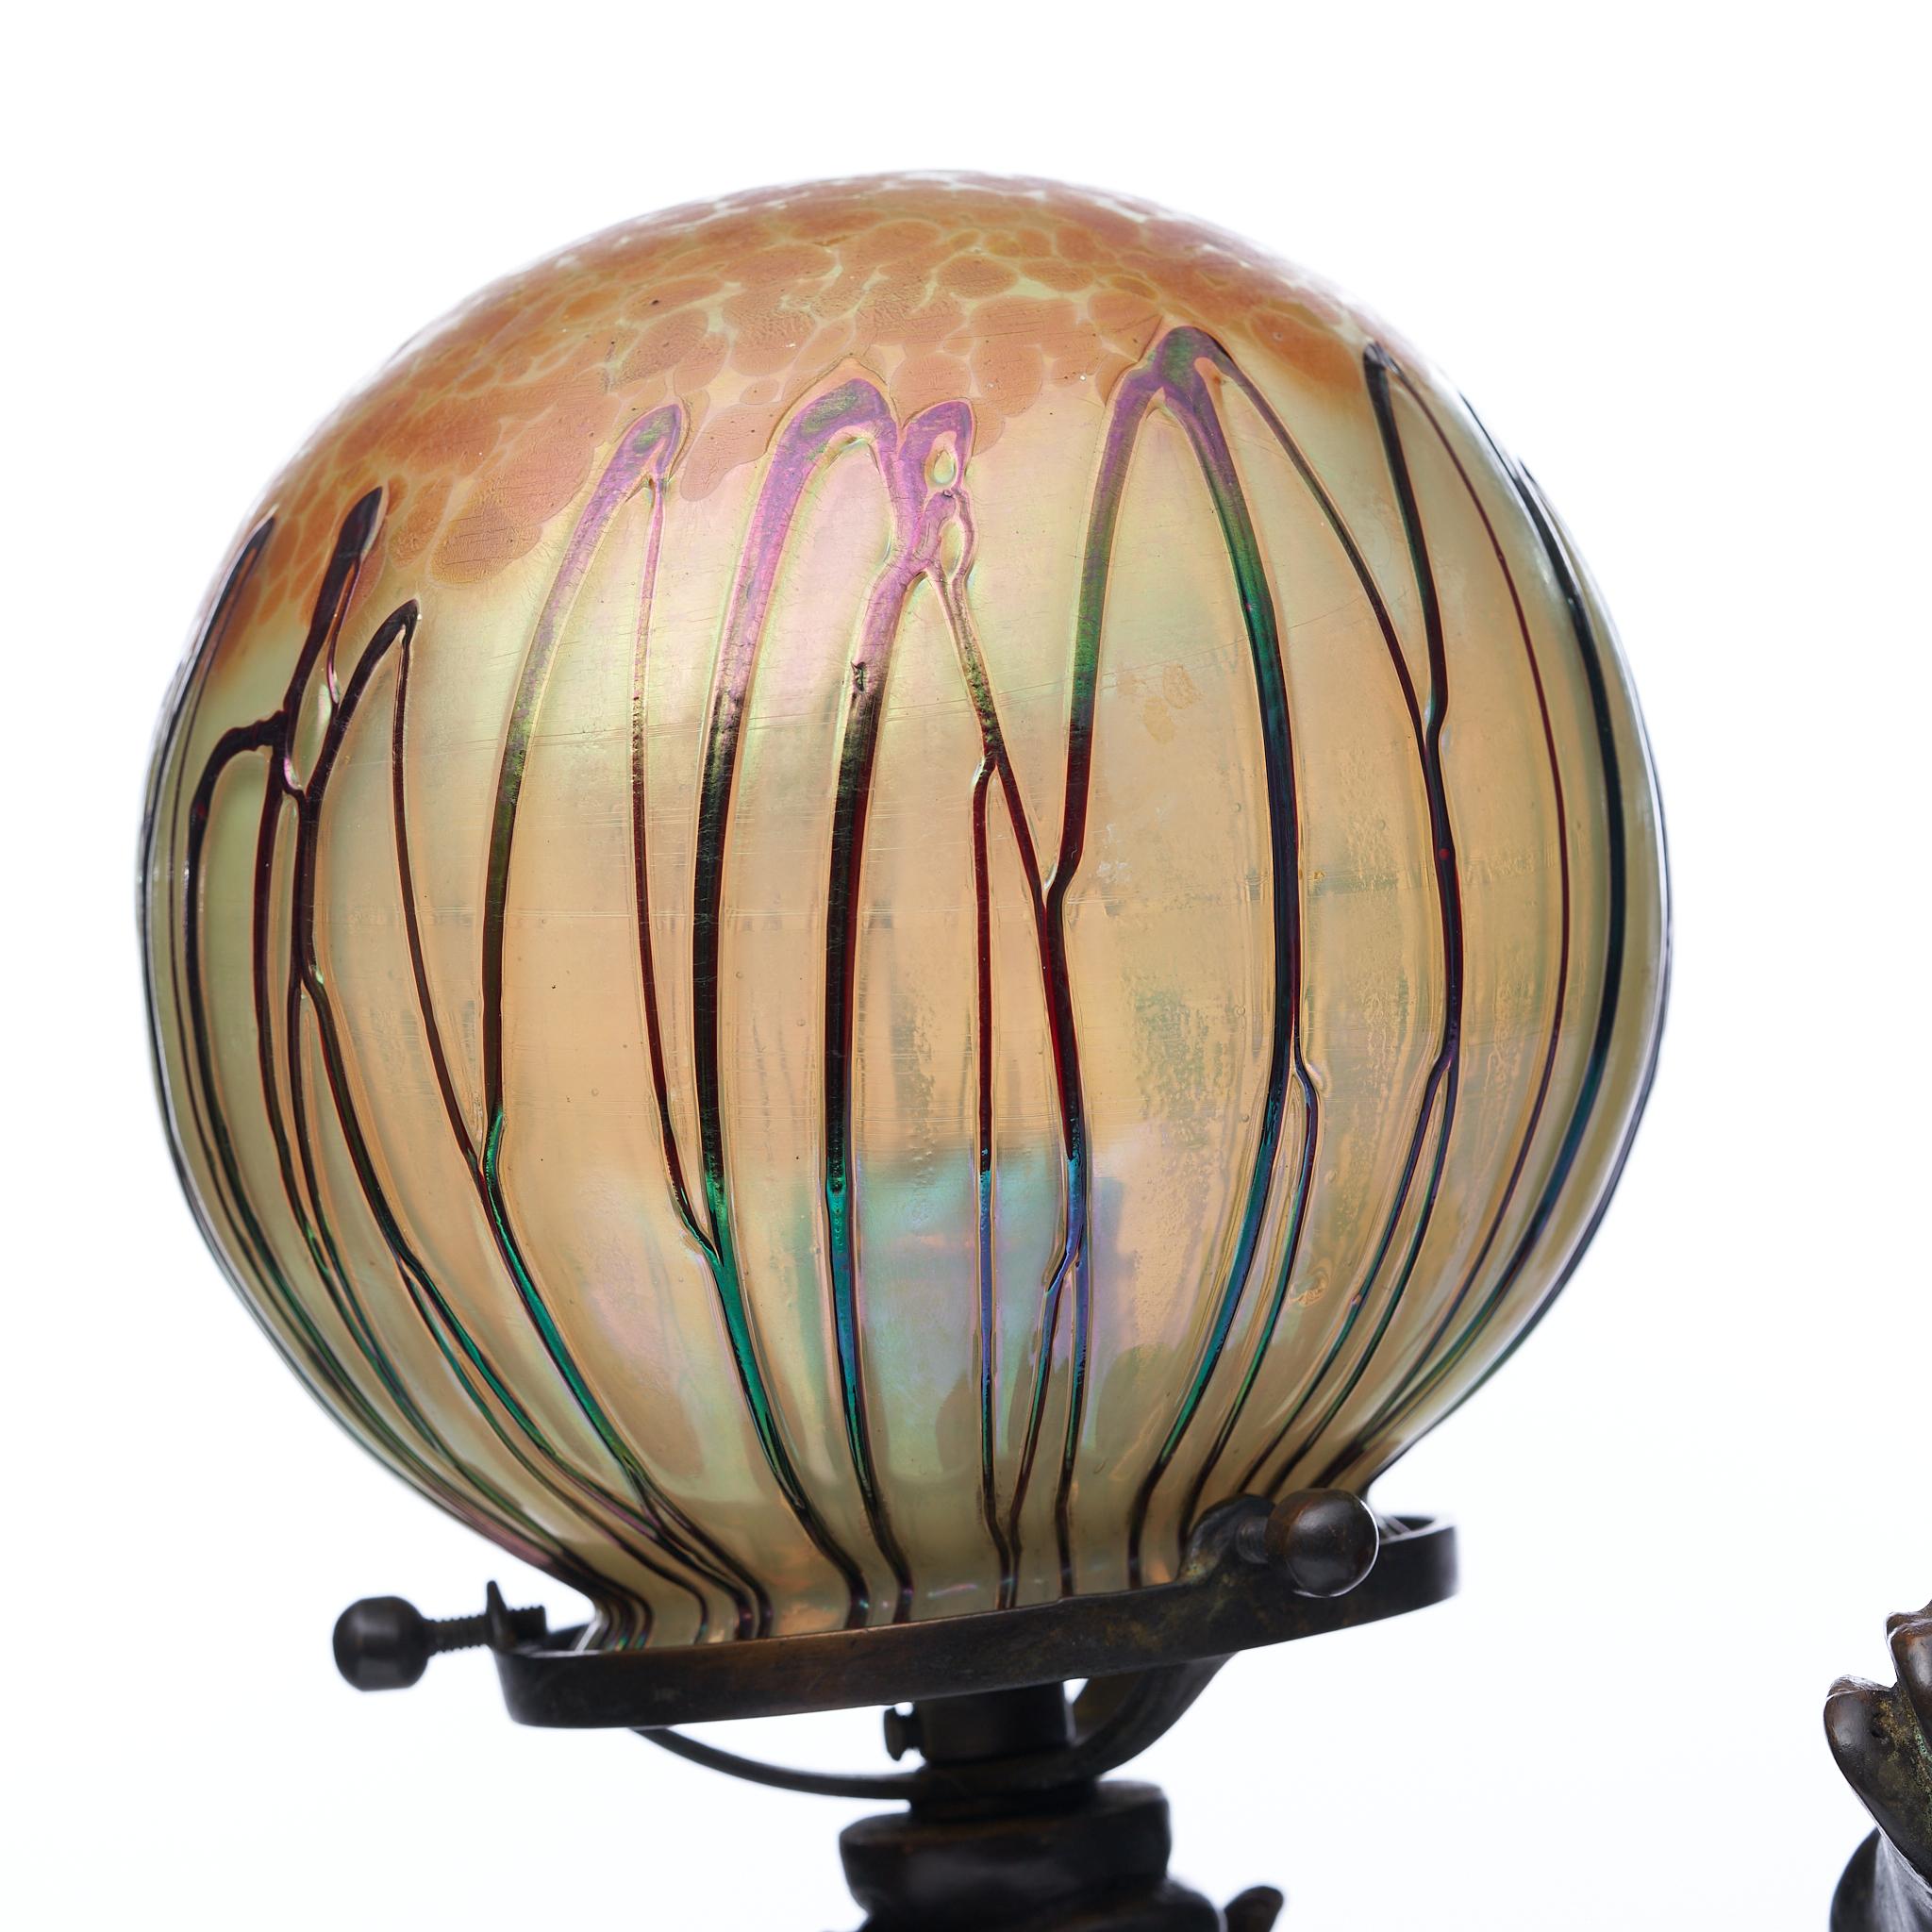 Pair of Durand, circa 1930's bronze lamps (attributed). No makers marks found.

The Loetz- style art glass globes are typical of the work of Martin Bach Jr. Each of the shades is supported by a rearing bronze pegasus winged horse. We came across a